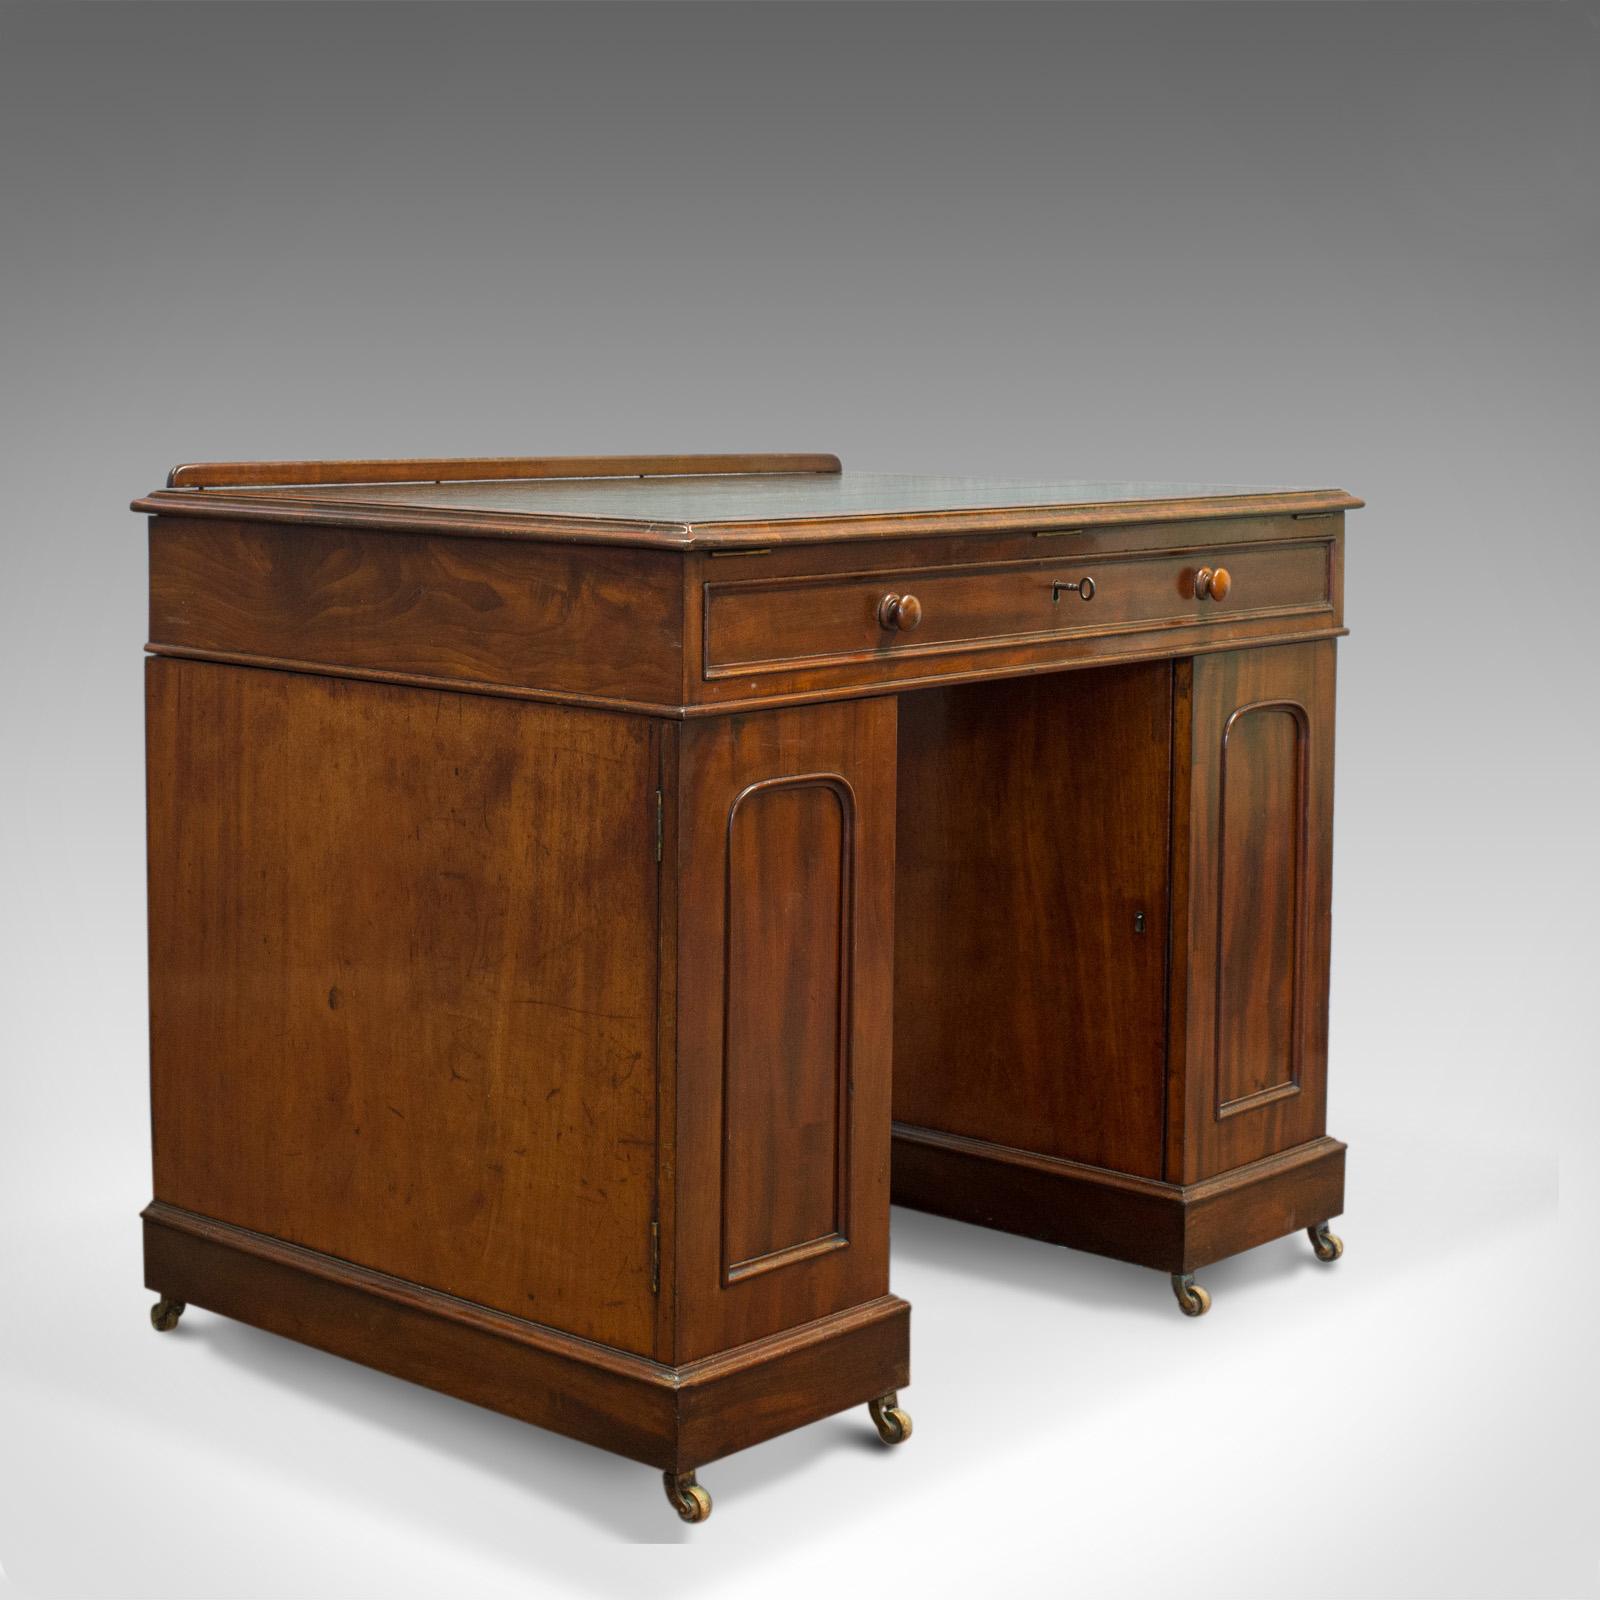 This is an antique architect's desk with adjustable top. English, Georgian, mahogany draughtsman's or cartographer's desk dating to the early 19th century, circa 1810.

A versatile and charming architect or cartographer's desk
Fashioned from rich